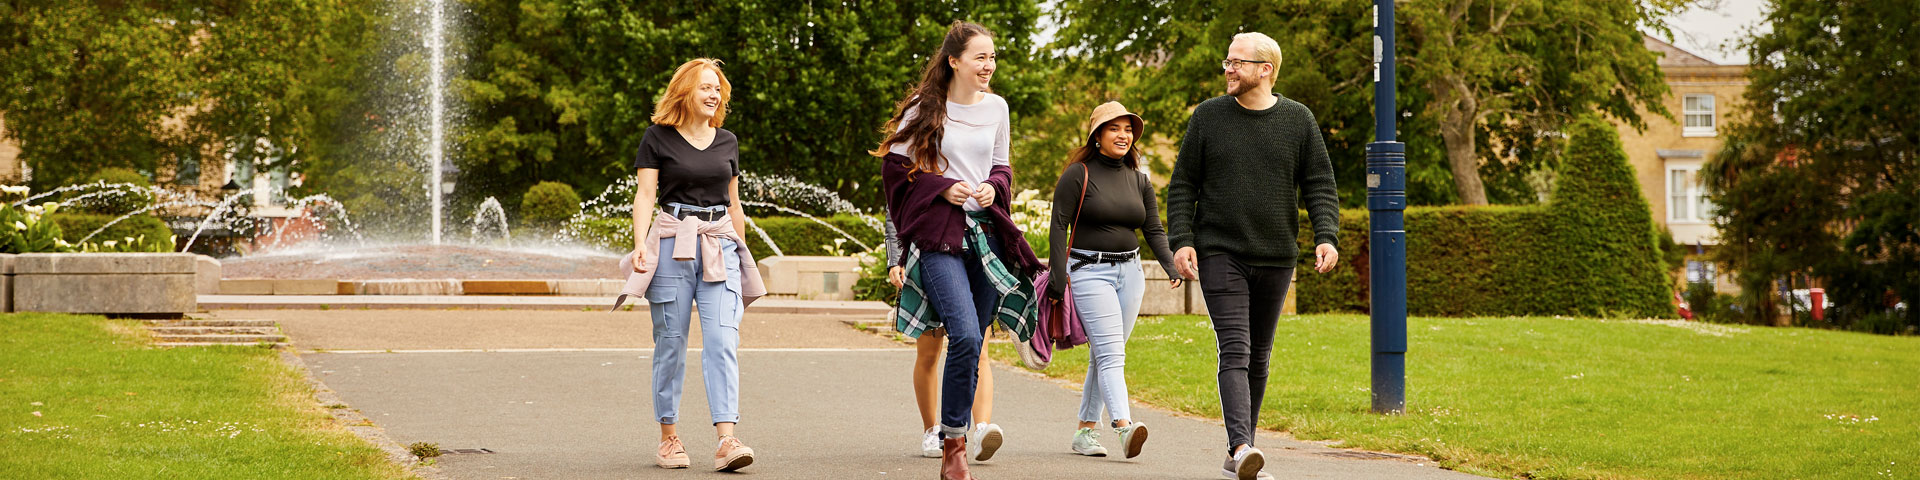 A group of students walking through the park